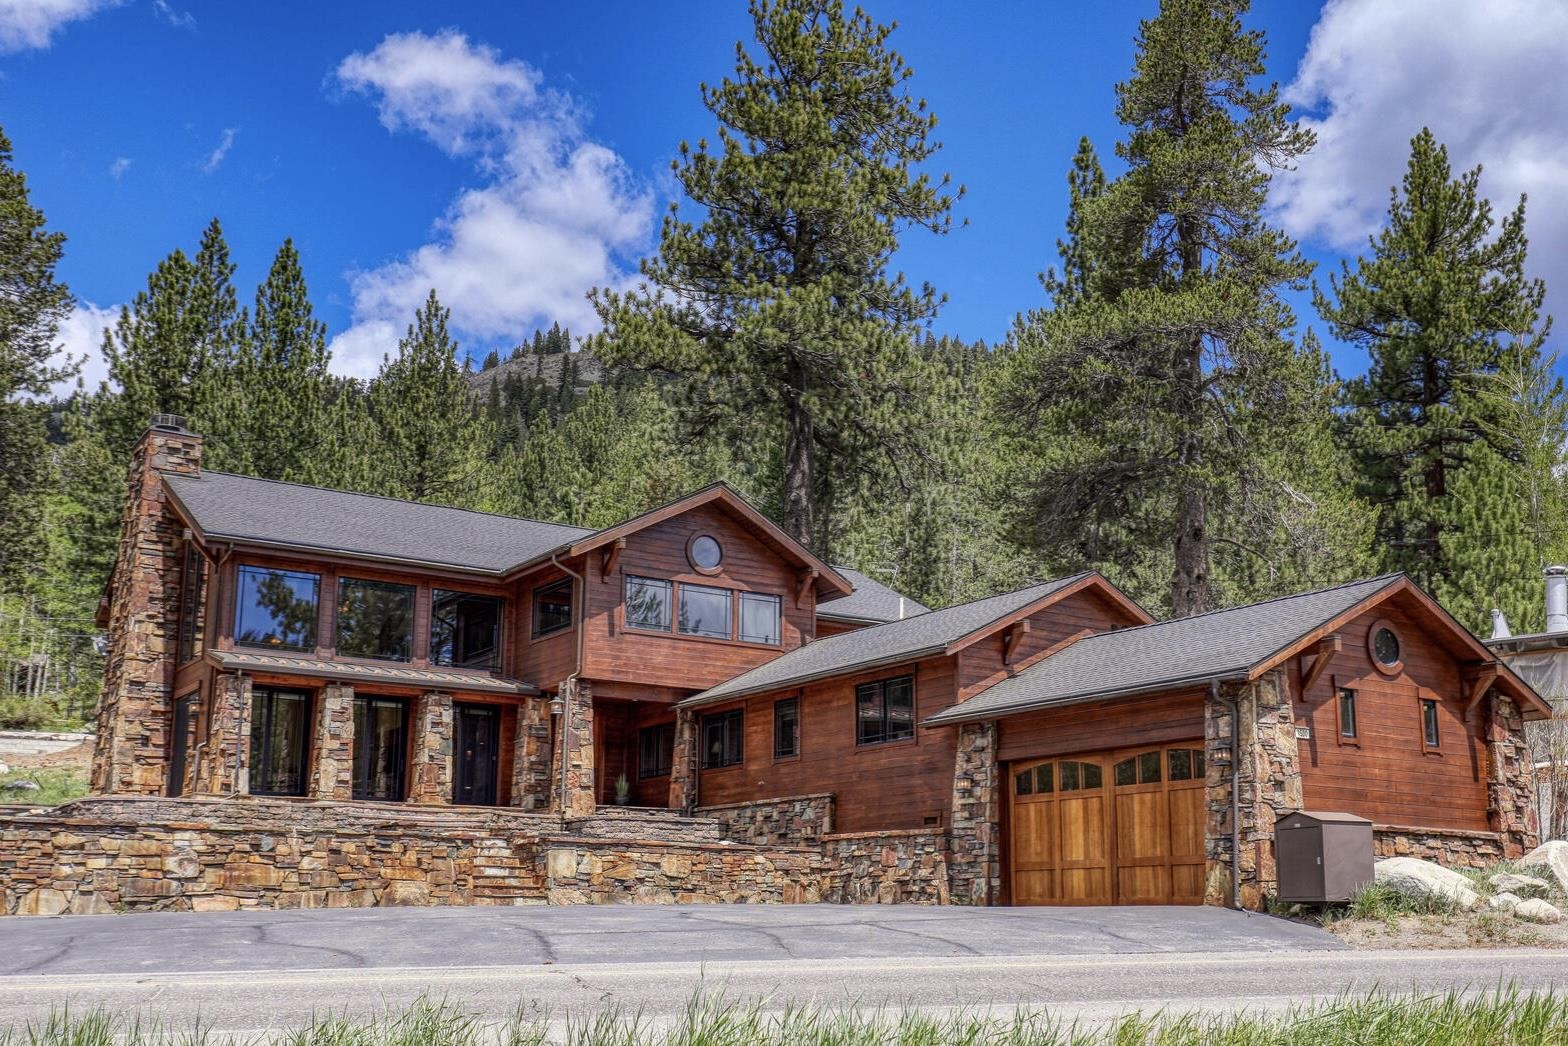 1500 Olympic Valley Road, Olympic Valley, CA 96146